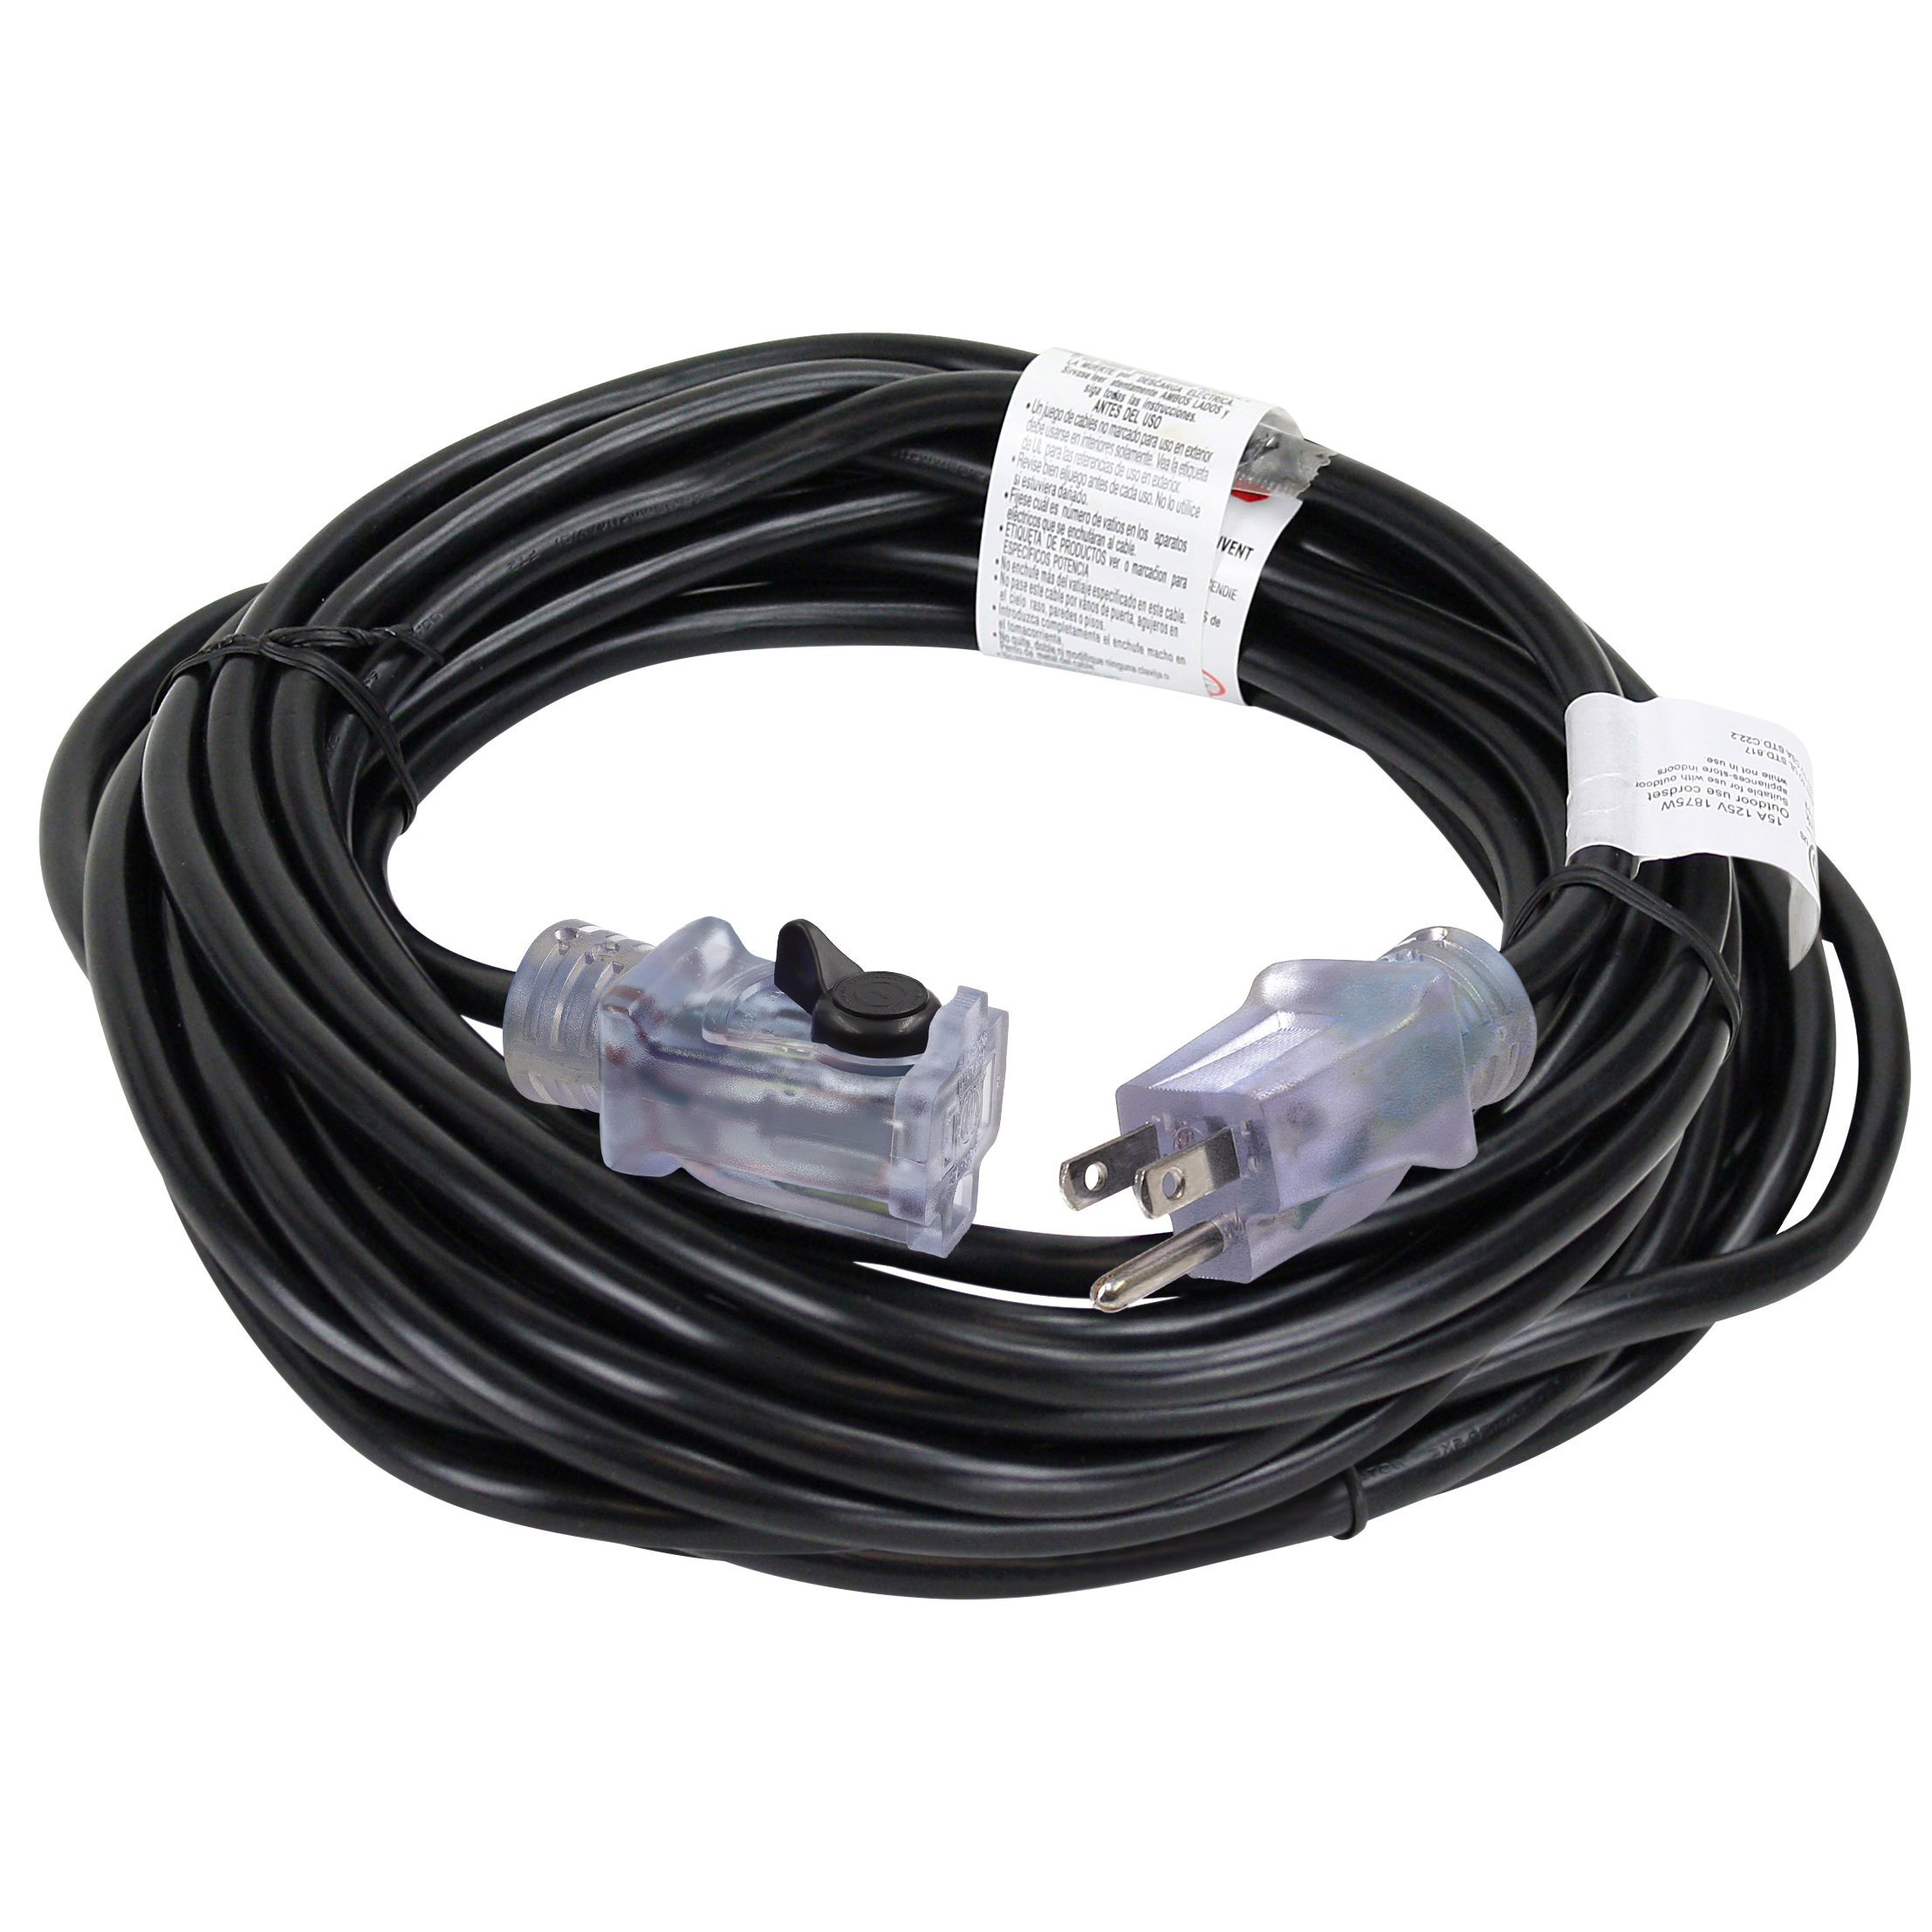 PowerZone ORECPL502628 Extension Cord, 16 AWG Cable, 40 ft L, 13 A, 125 V, Black